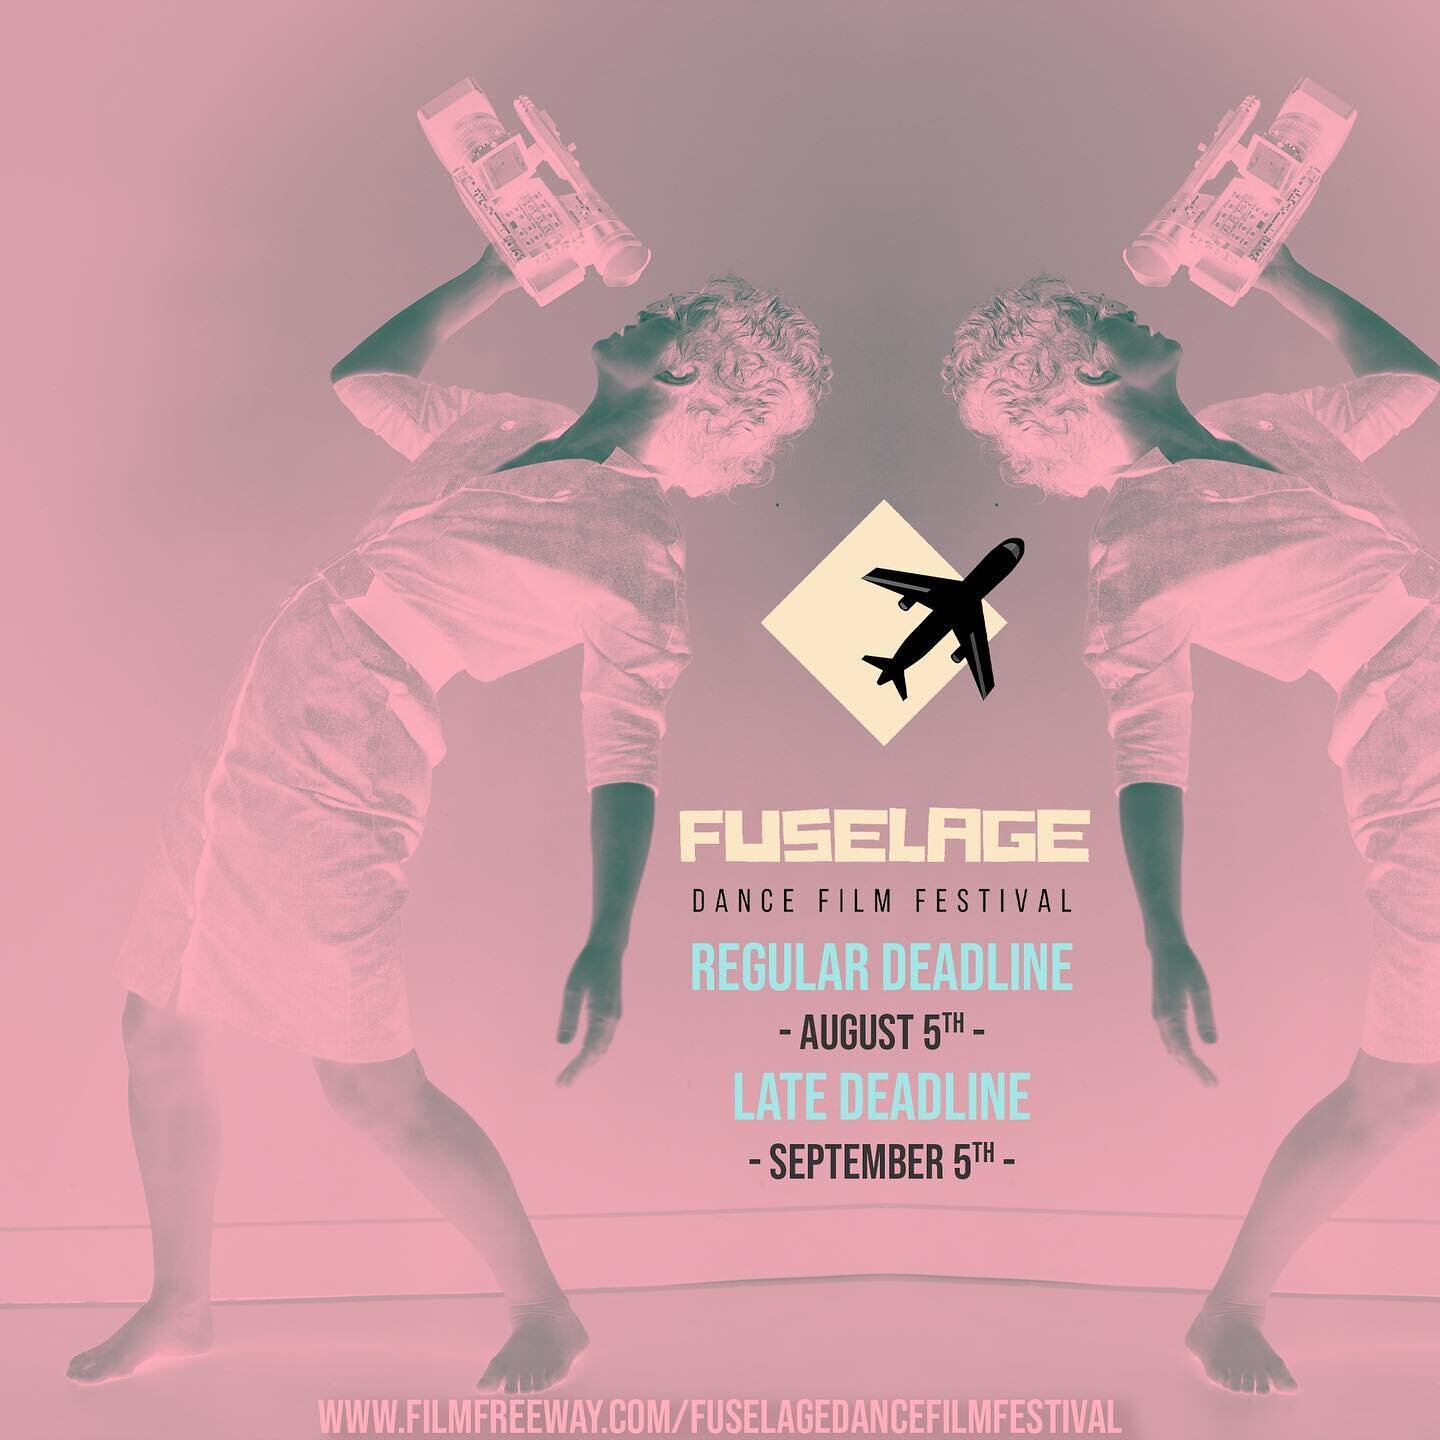 ⚡️🎥⚡️ The sixth annual @fuselagedancefilmfestival is open for submissions!!

Regular Deadline - August 5th
Late Deadline - September 5th

We are accepting film submissions up to 15min in length with a focus on #dance.

Fuselage Dance Film Festival 2